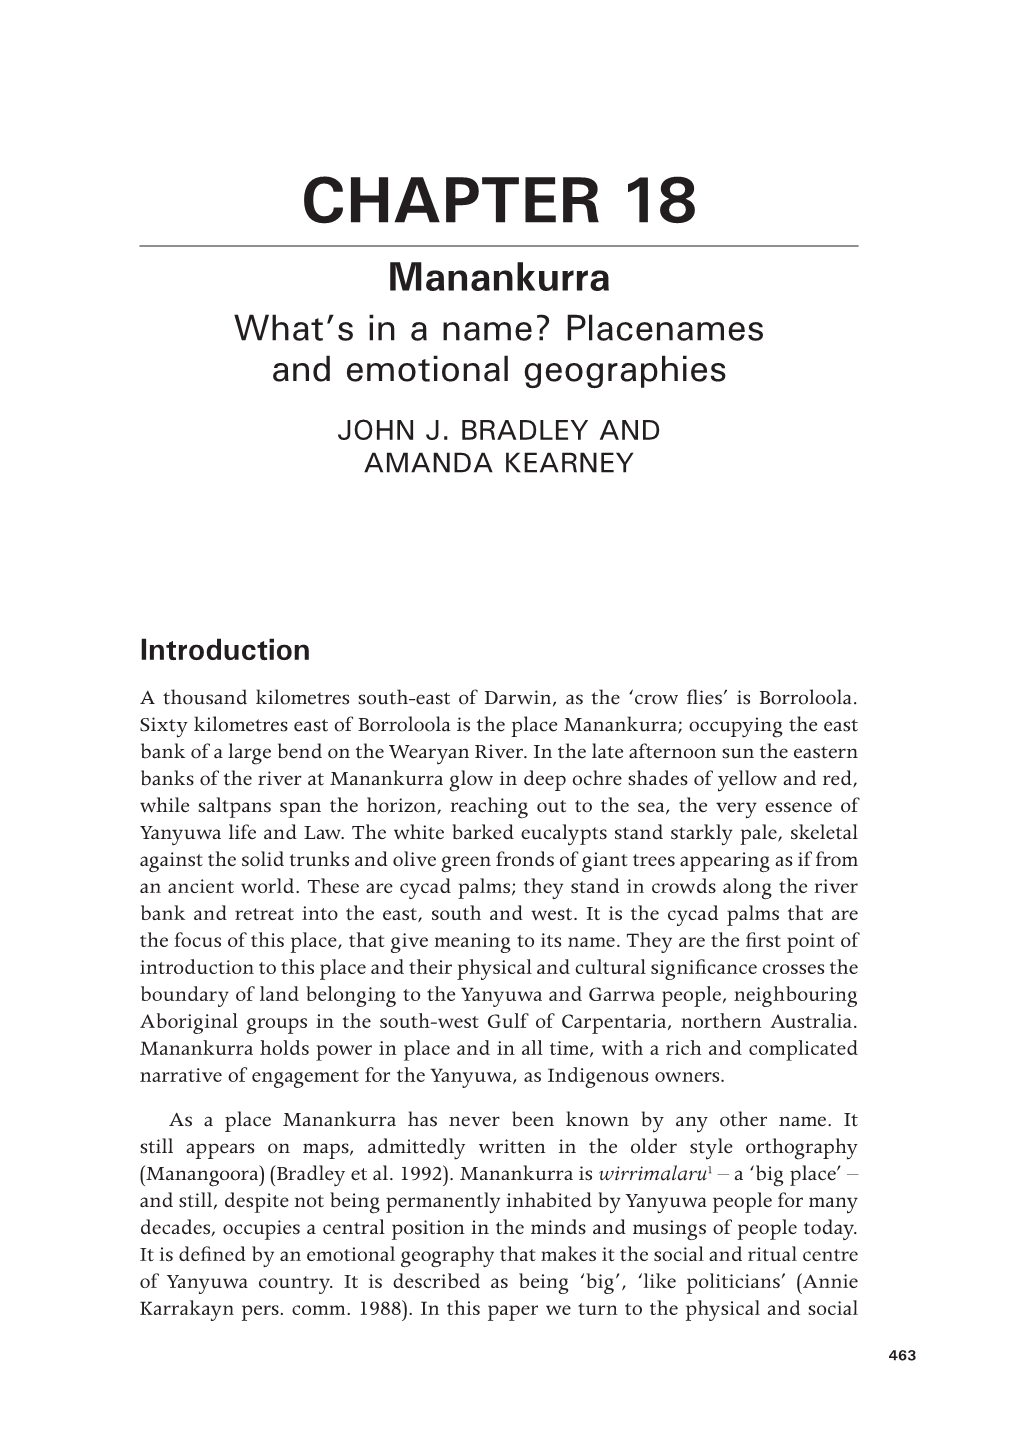 CHAPTER 18 Manankurra What’S in a Name? Placenames and Emotional Geographies JOHN J